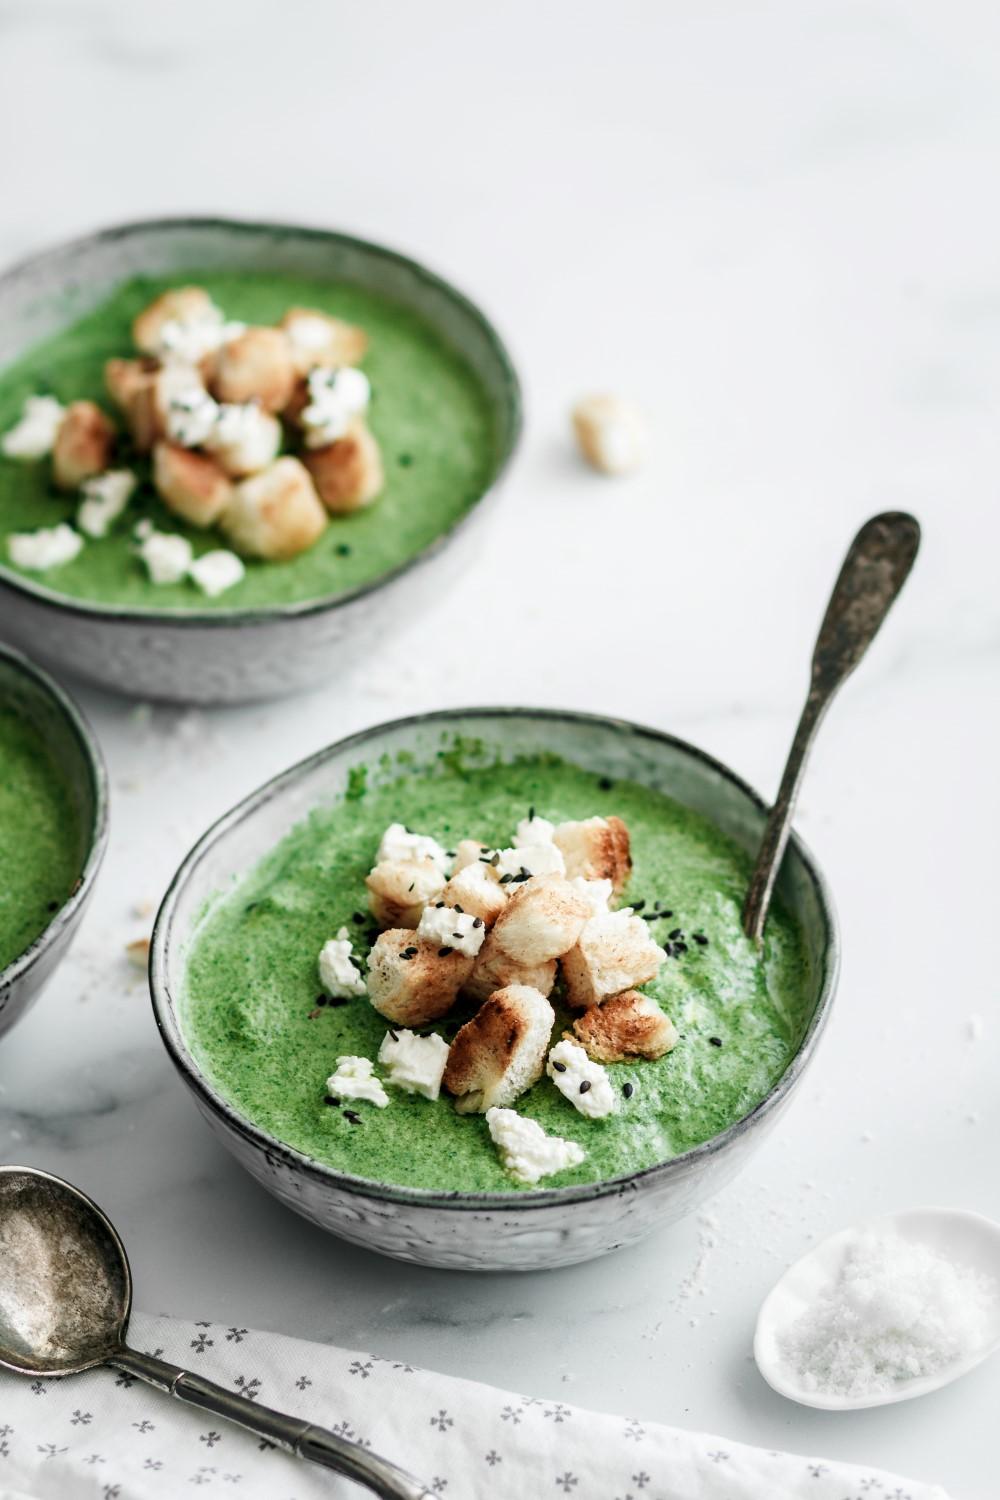 A bowl of green soup with bread cubes and cheese on top the article 5 best camera angles for food photography + which equipment to use by Anja Burgar